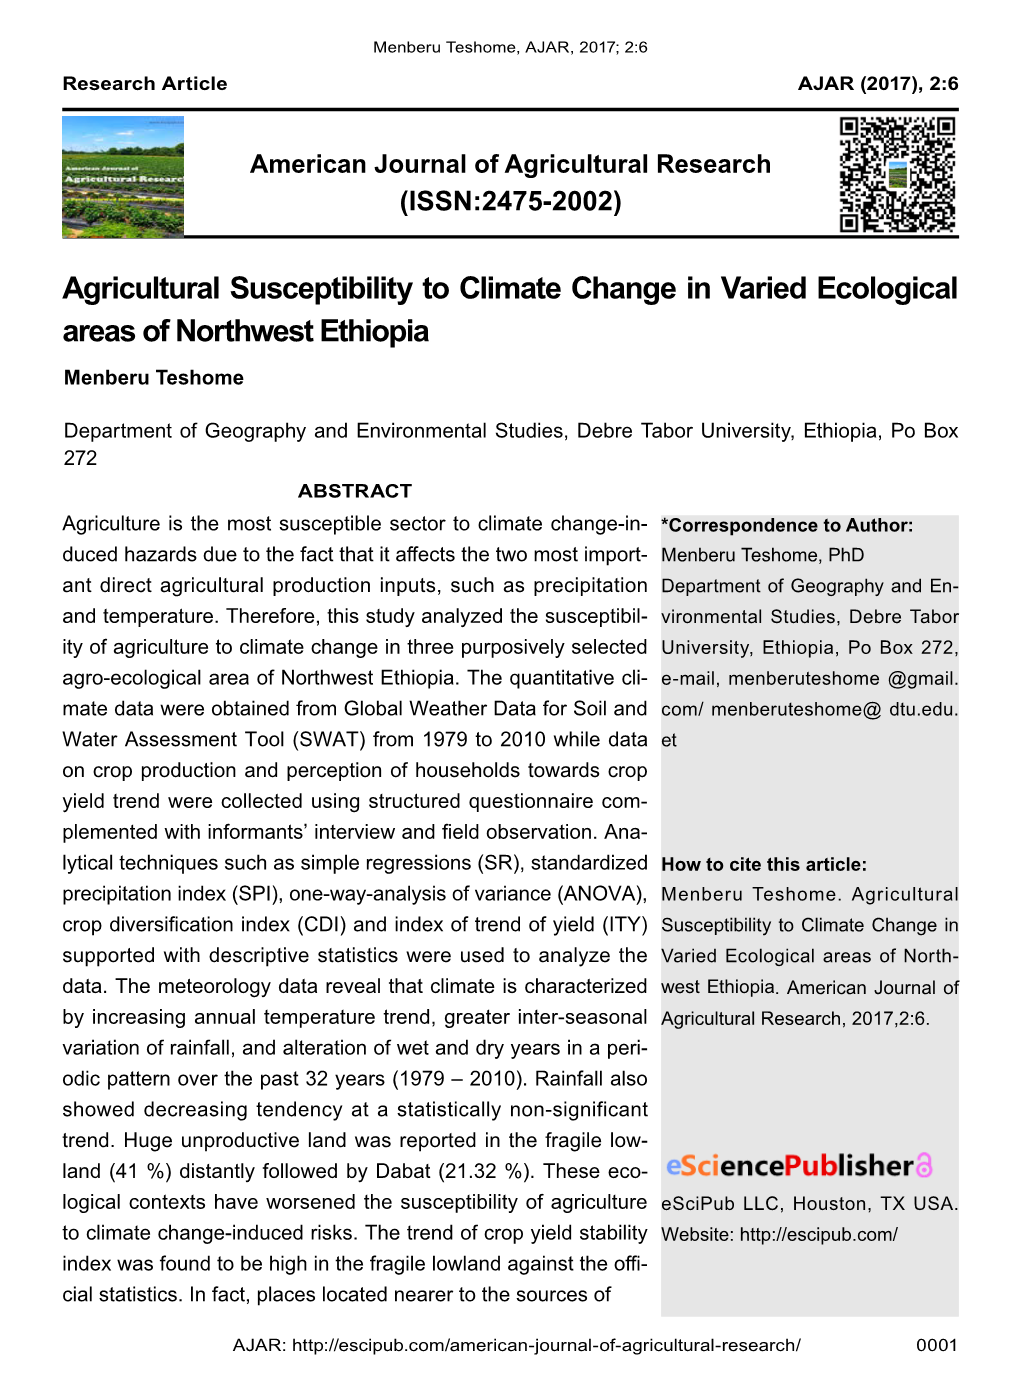 Agricultural Susceptibility to Climate Change in Varied Ecological Areas of Northwest Ethiopia Menberu Teshome